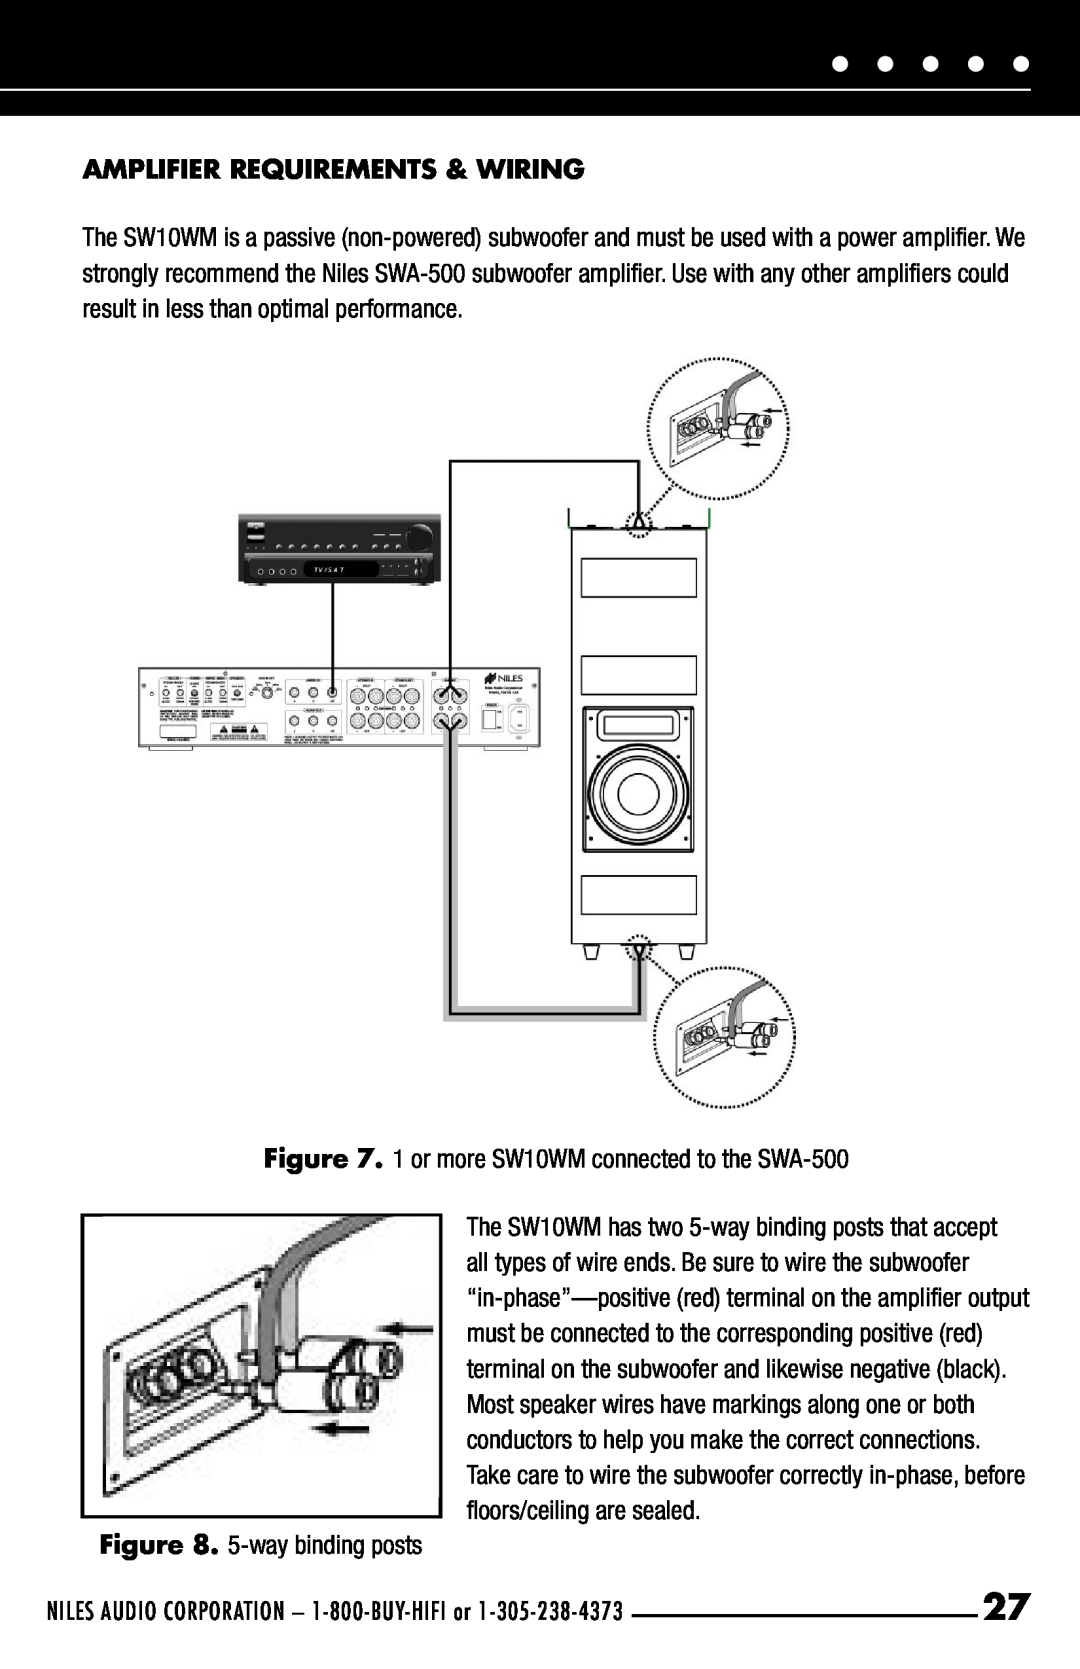 Niles Audio SW10JM Amplifier Requirements & Wiring, 1 or more SW10WM connected to the SWA-500, 5-way binding posts 